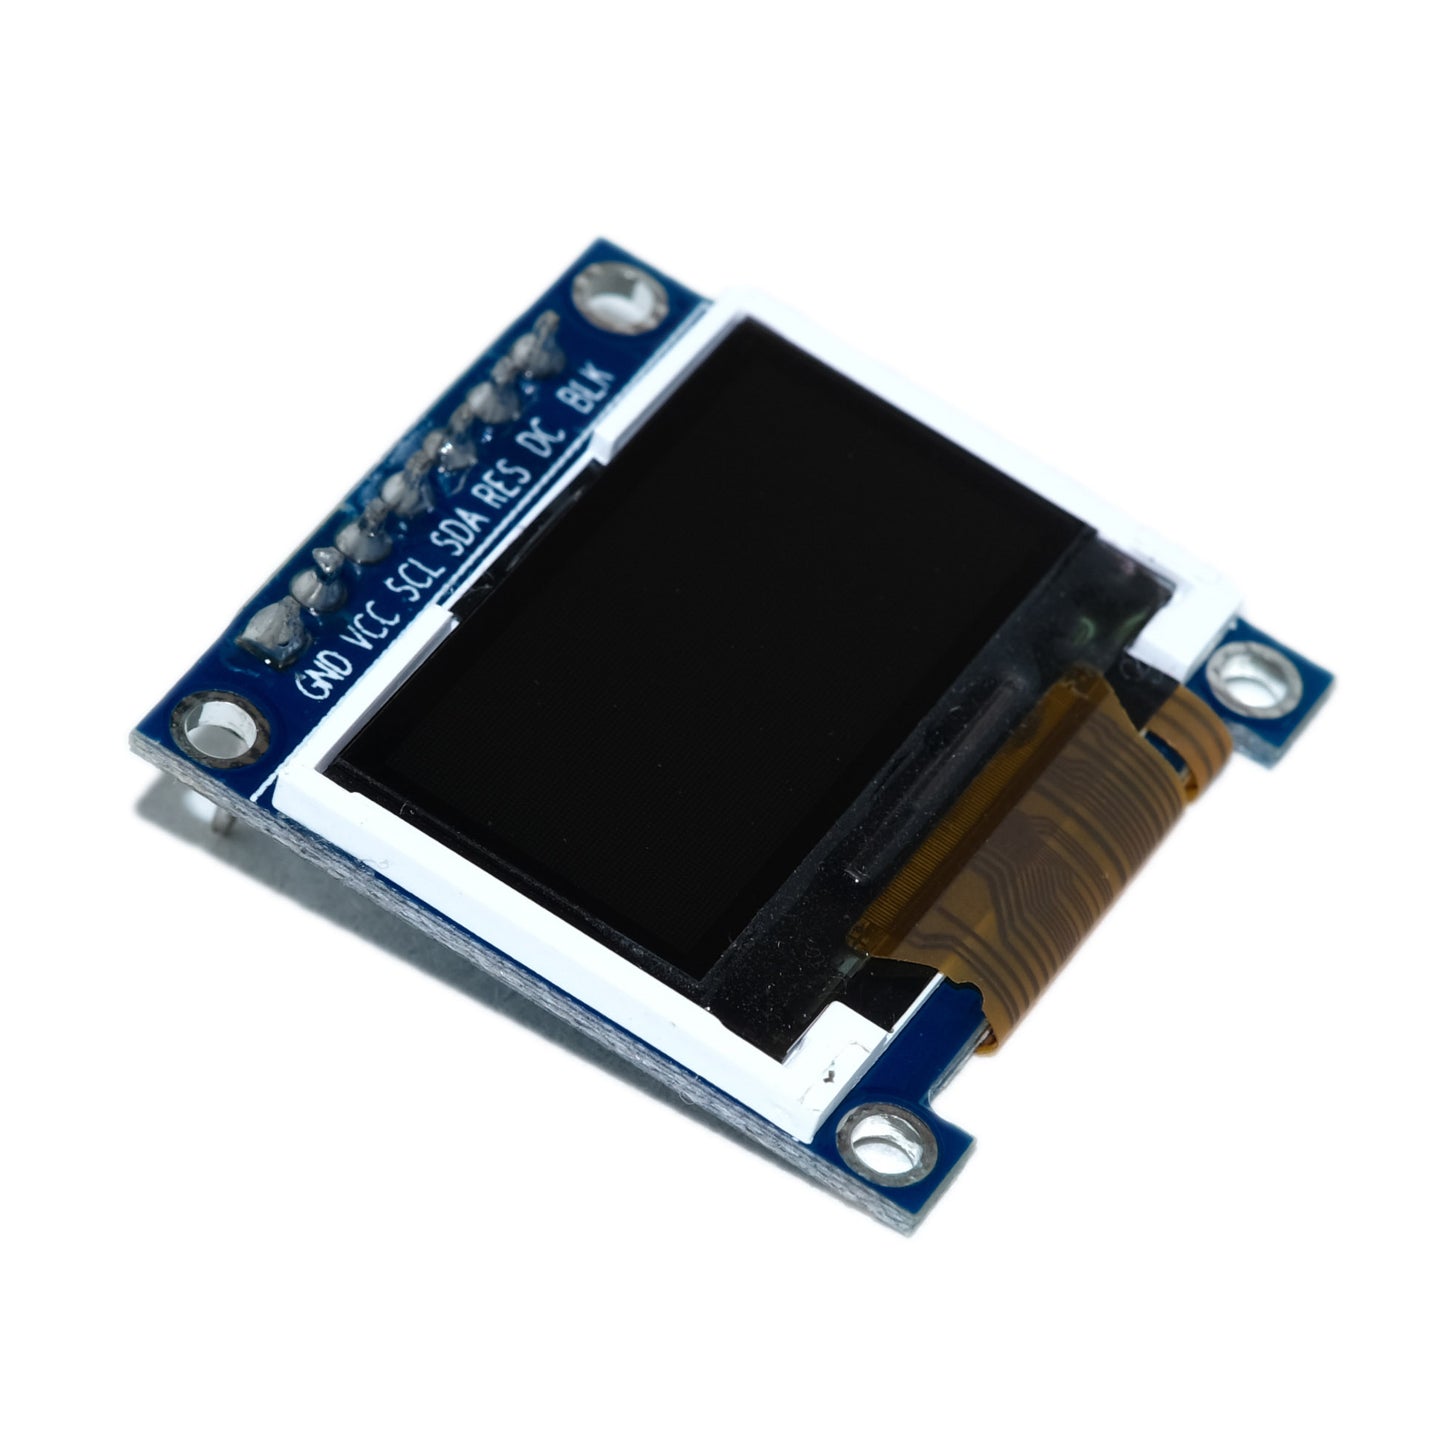 Top view of 0.96-inch TFT display module